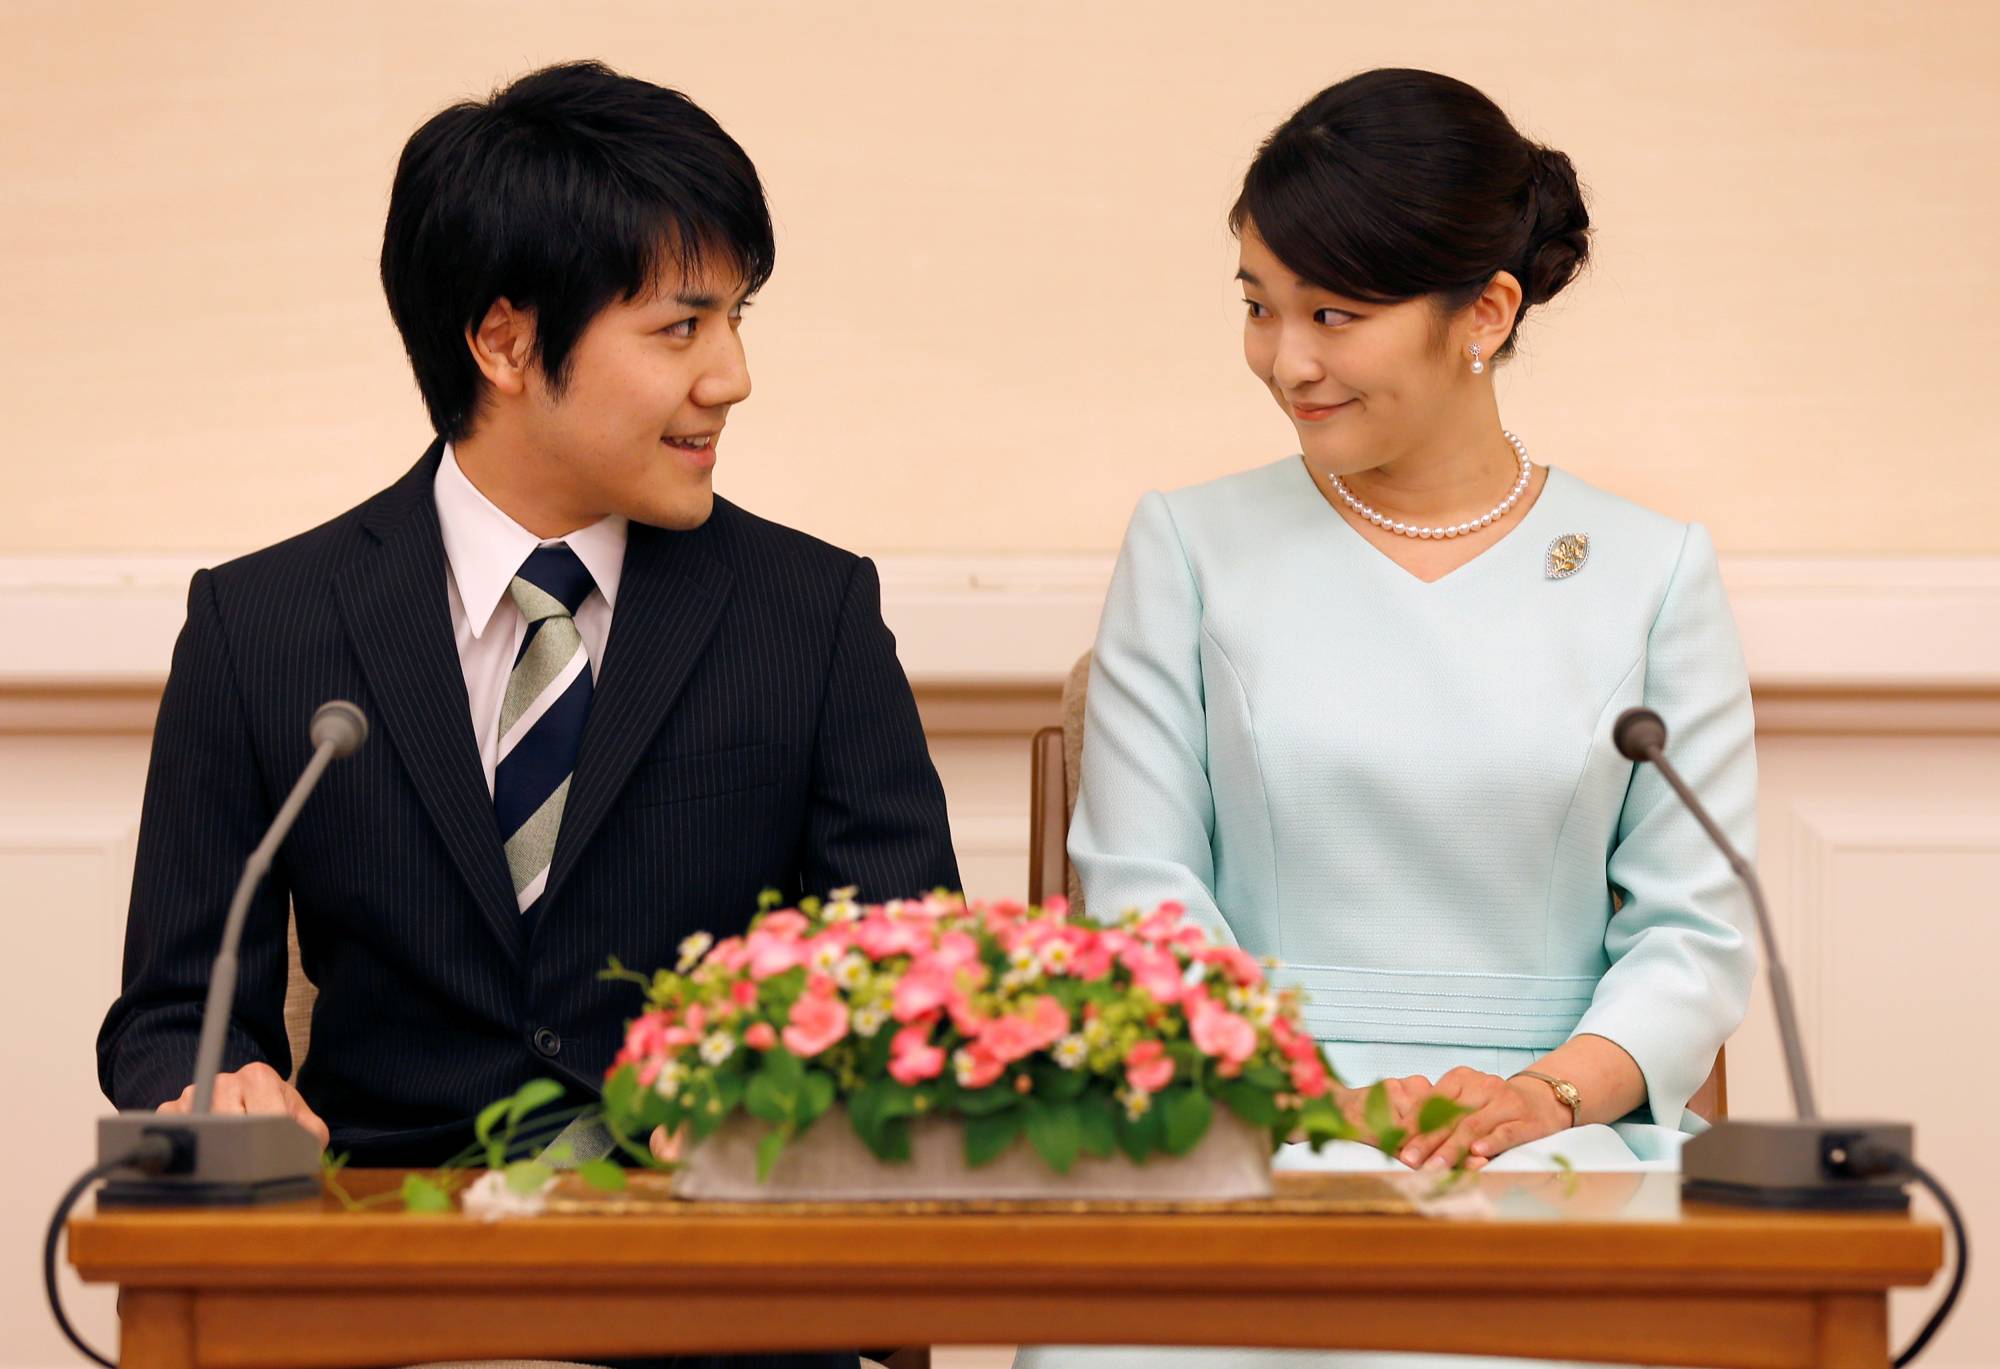 Princess Mako and her fiance, Kei Komuro, attend a news conference to announce their engagement in Tokyo in September 2017. | REUTERS